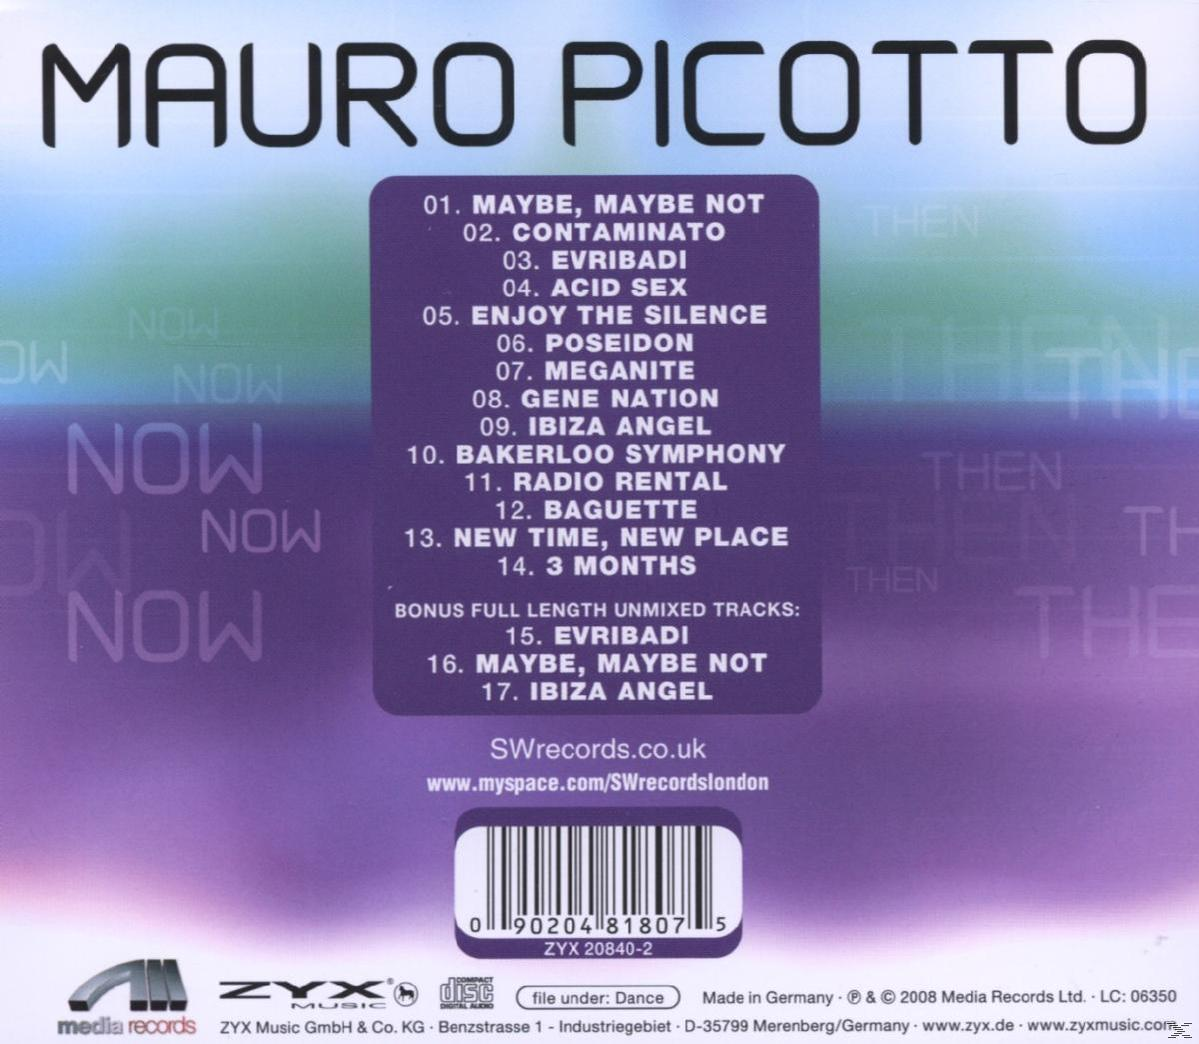 (CD) Picotto Now Then Mauro And - -